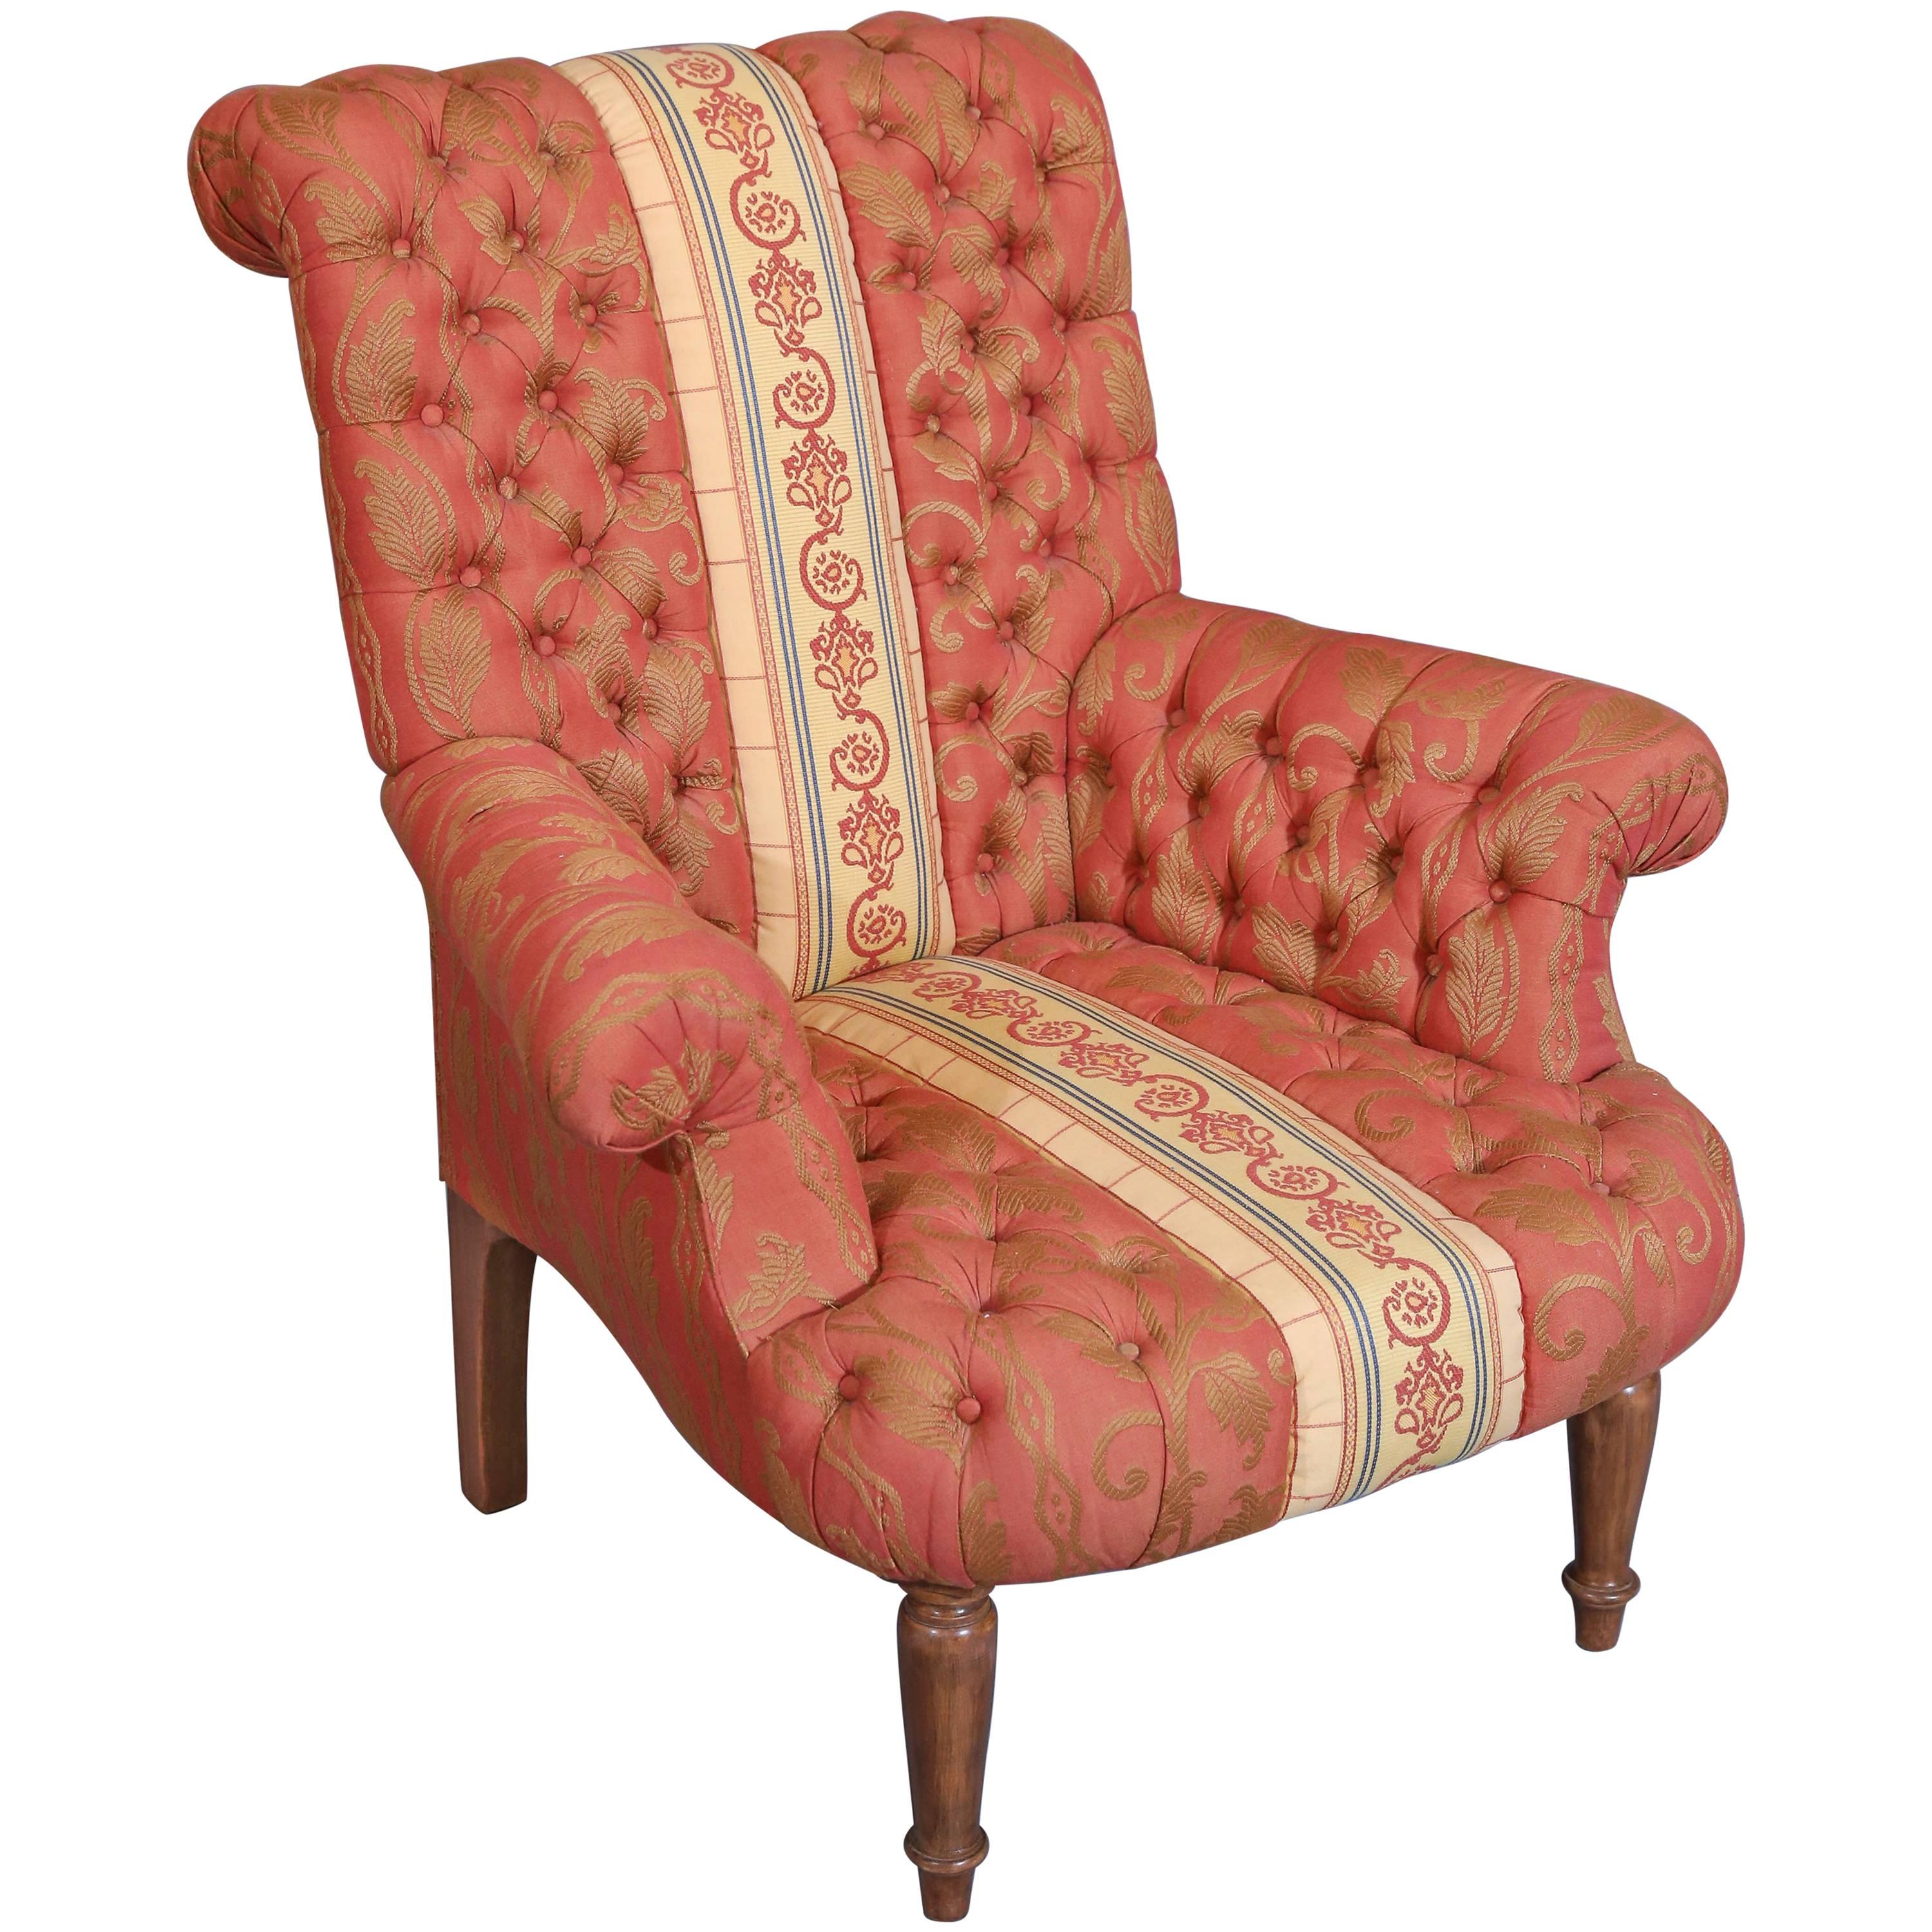  Custom Napoleon III Style Tufted Chair with contrast detail  For Sale